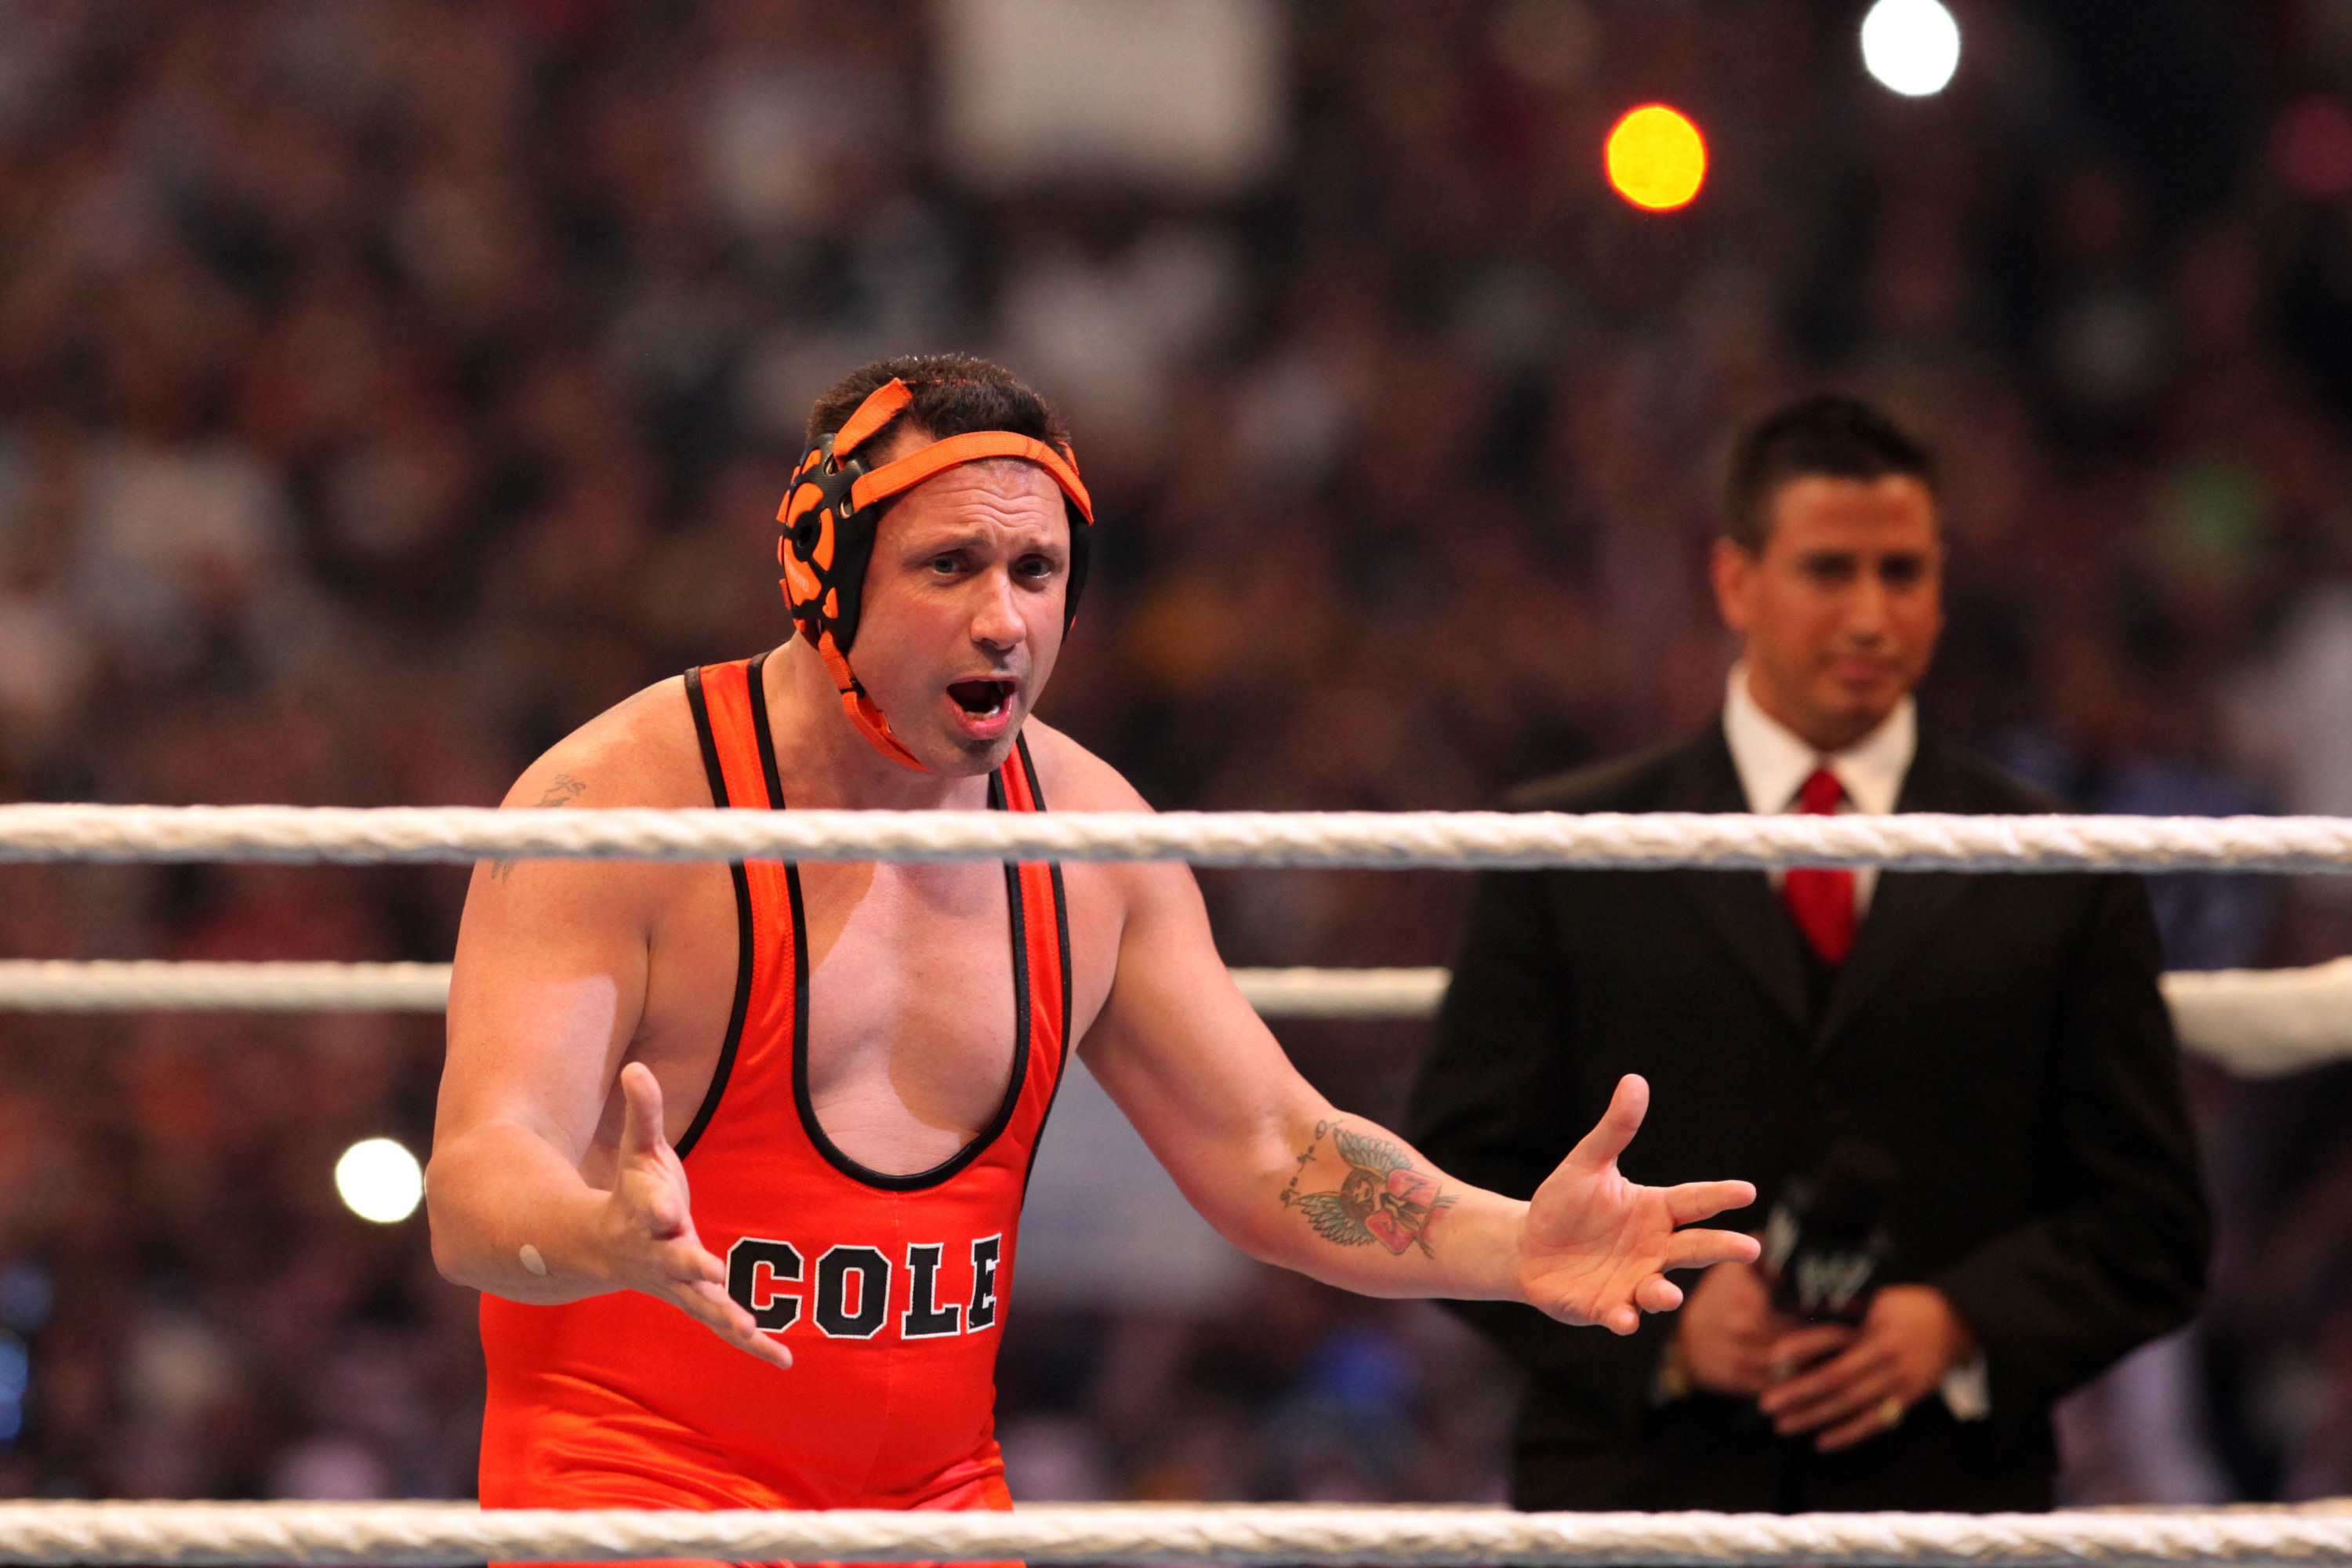 Michael Cole is introduced to the 70,000 plus fans in attendance at Wrestlemania 27